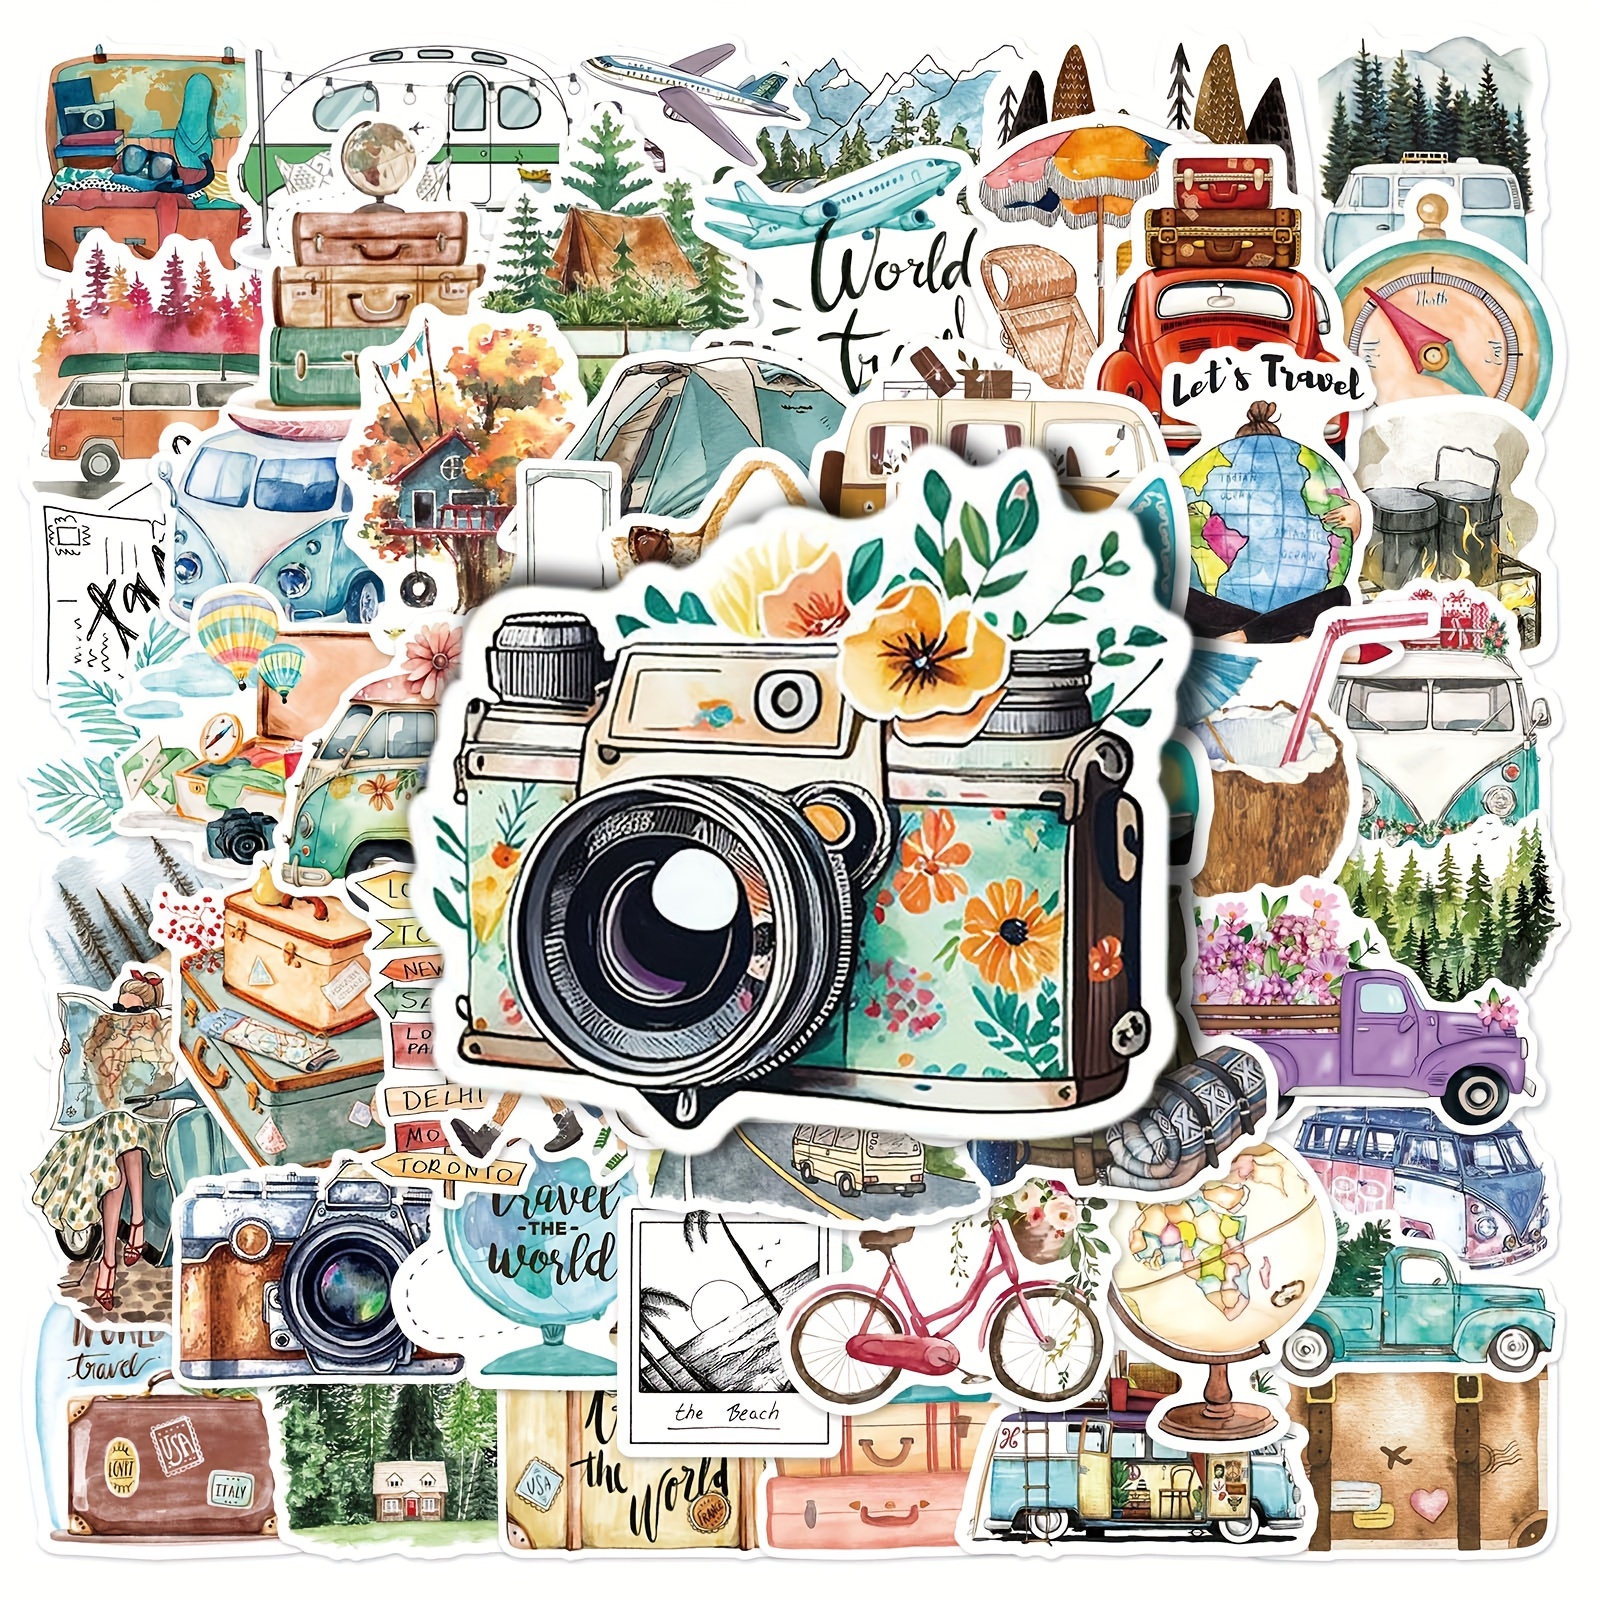 Explore the World with Custom Travel Stickers